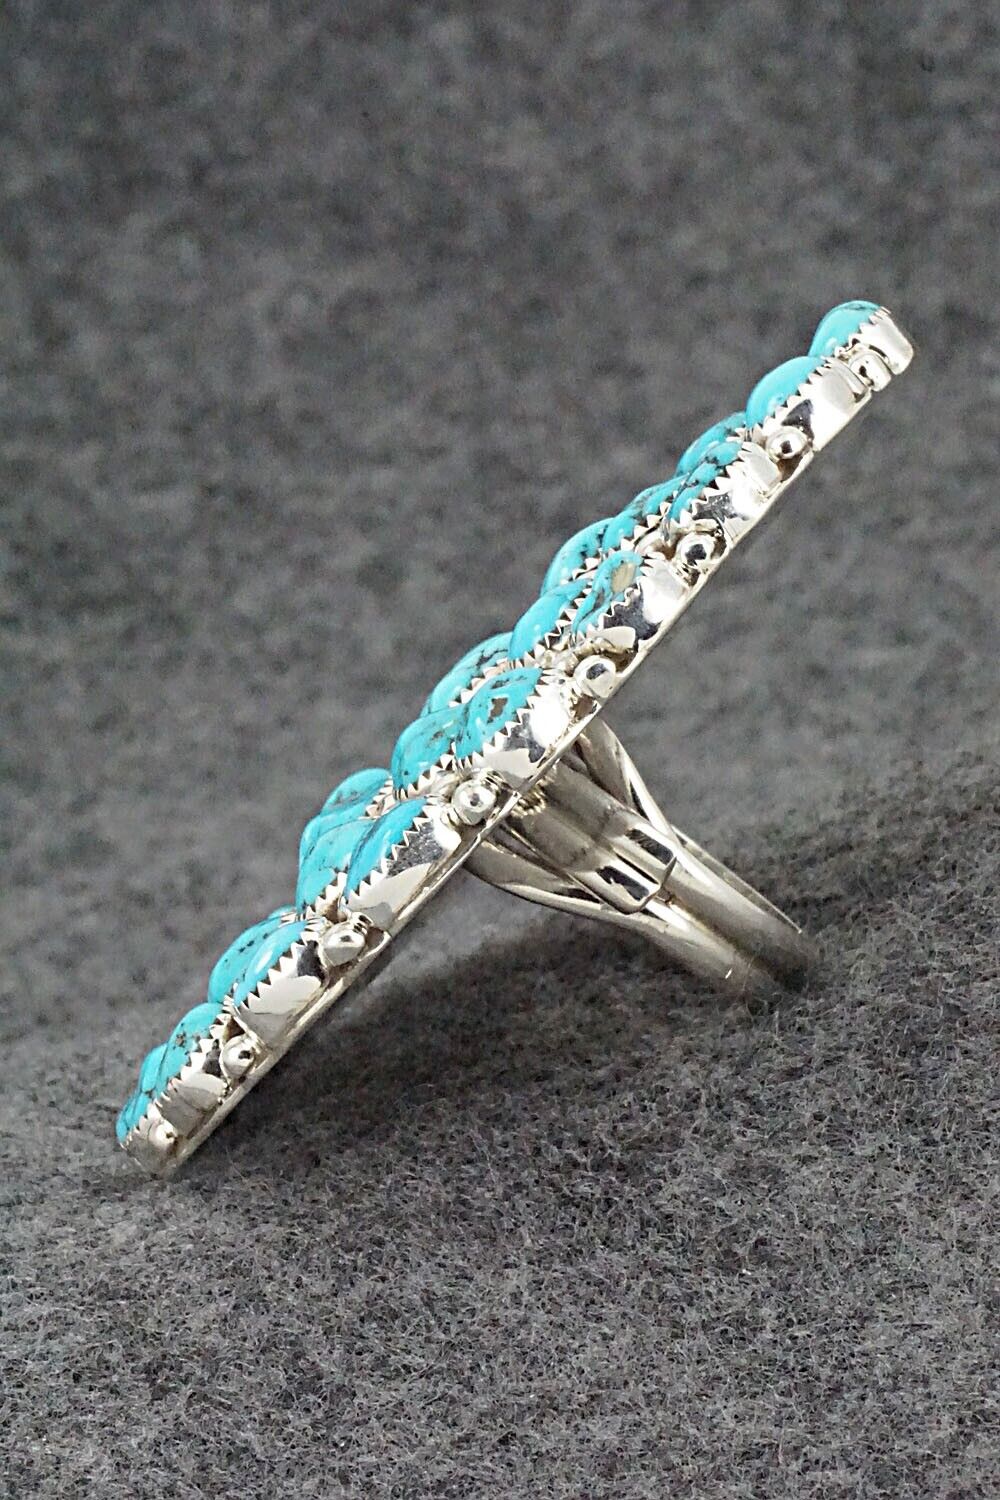 Turquoise and Sterling Silver Ring - Marlene Haley - Size 7 (adj.)